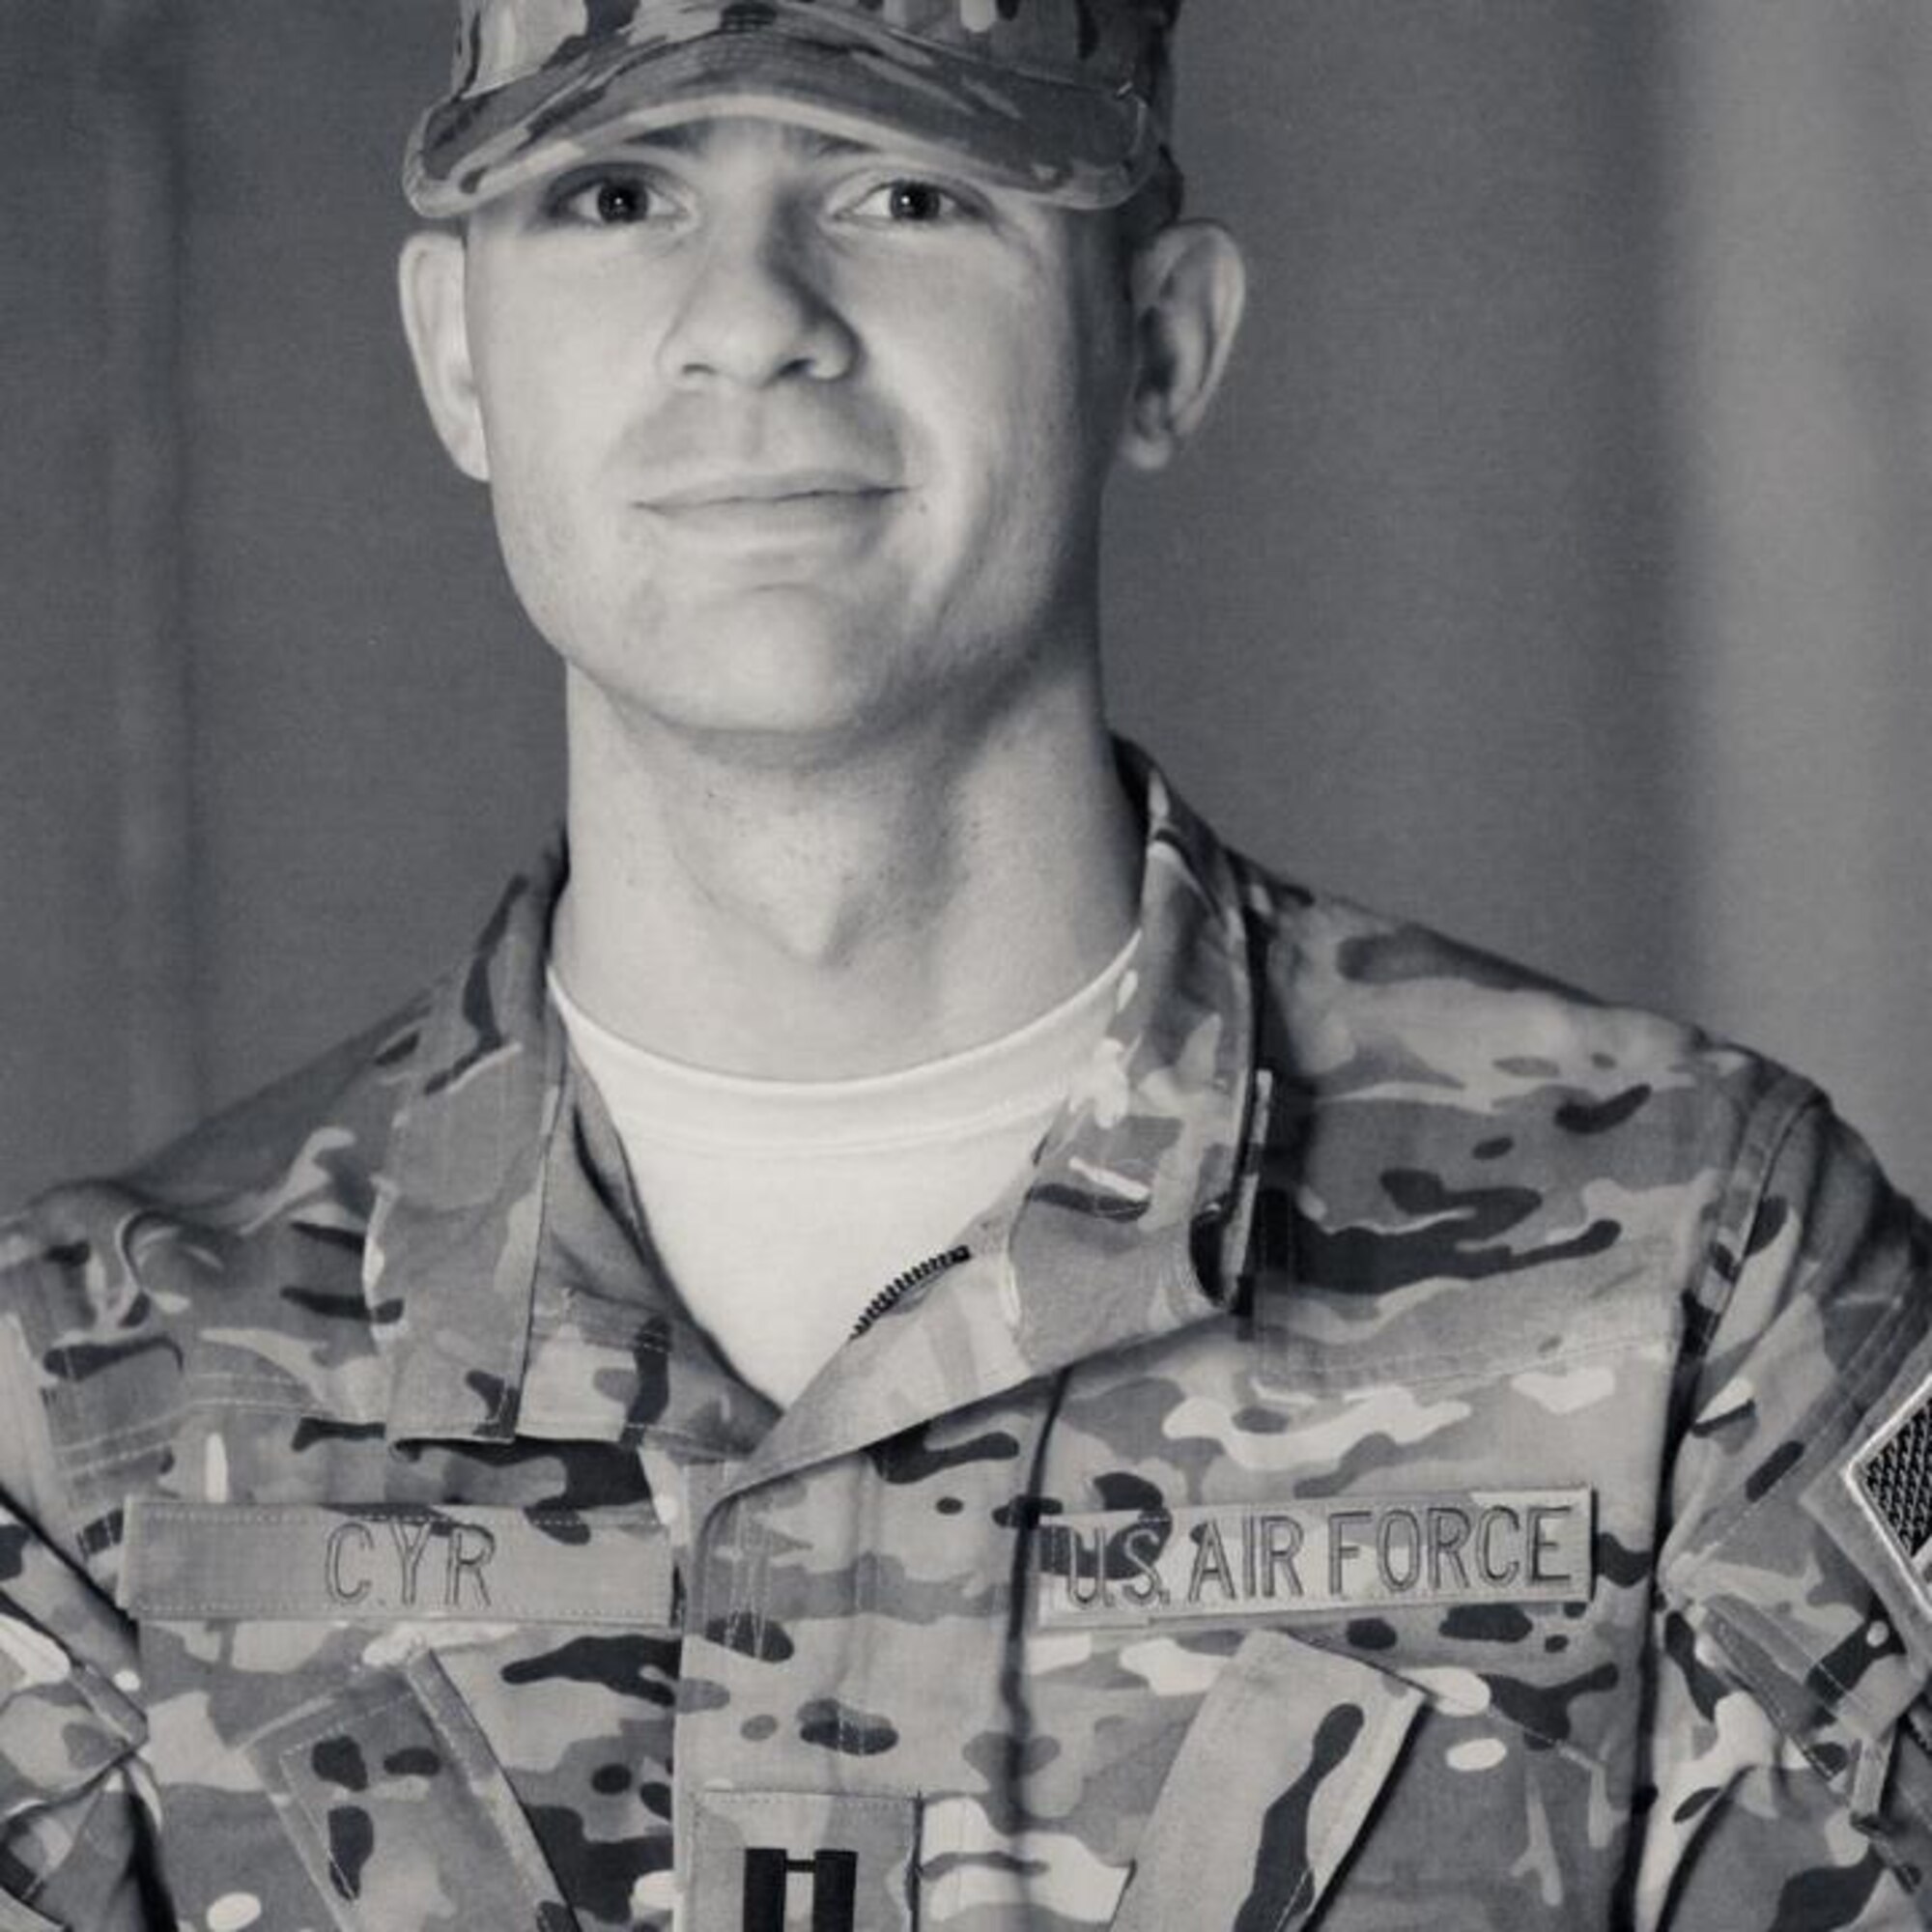 Capt. Brandon Cyr, 28, a KC-135 instructor pilot, was among four crewmembers on board an MC-12 who were killed April 27 when their aircraft crashed in the Zabul province in southern Afghanistan. Cyr was a member of the 906th Air Refueling Squadron within the 375th Air Mobility Wing, its parent unit for administrative purposes. However, he flew alongside members of the Illinois Air National Guard's 126th Air Refueling Wing as part of the Air Force's Total Force Integration efforts, and as a result, the loss is deeply felt by members in both wings here, said Col. David Almand, 375th AMW commander. (courtesty photo)